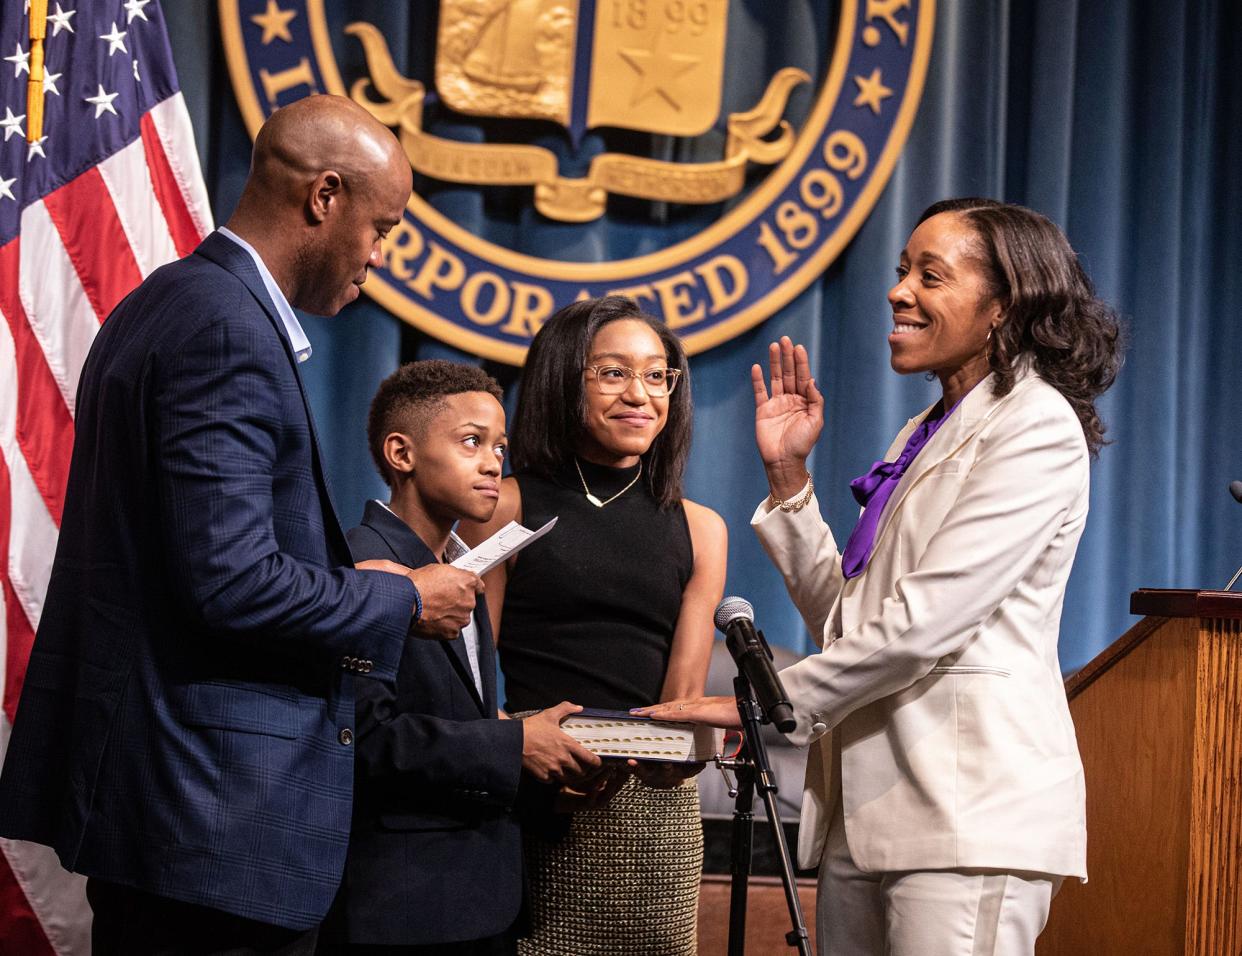 Yadira Ramos-Herbert is sworn in as the new mayor of New Rochelle, NY, during a ceremony Jan. 1, 2024 at City Hall. Administering the oath was her husband, Jeffrey. Her children Tomas, 10, and Julyssa, 13, looked on. Members of the city council also took the oath of office during the ceremony.